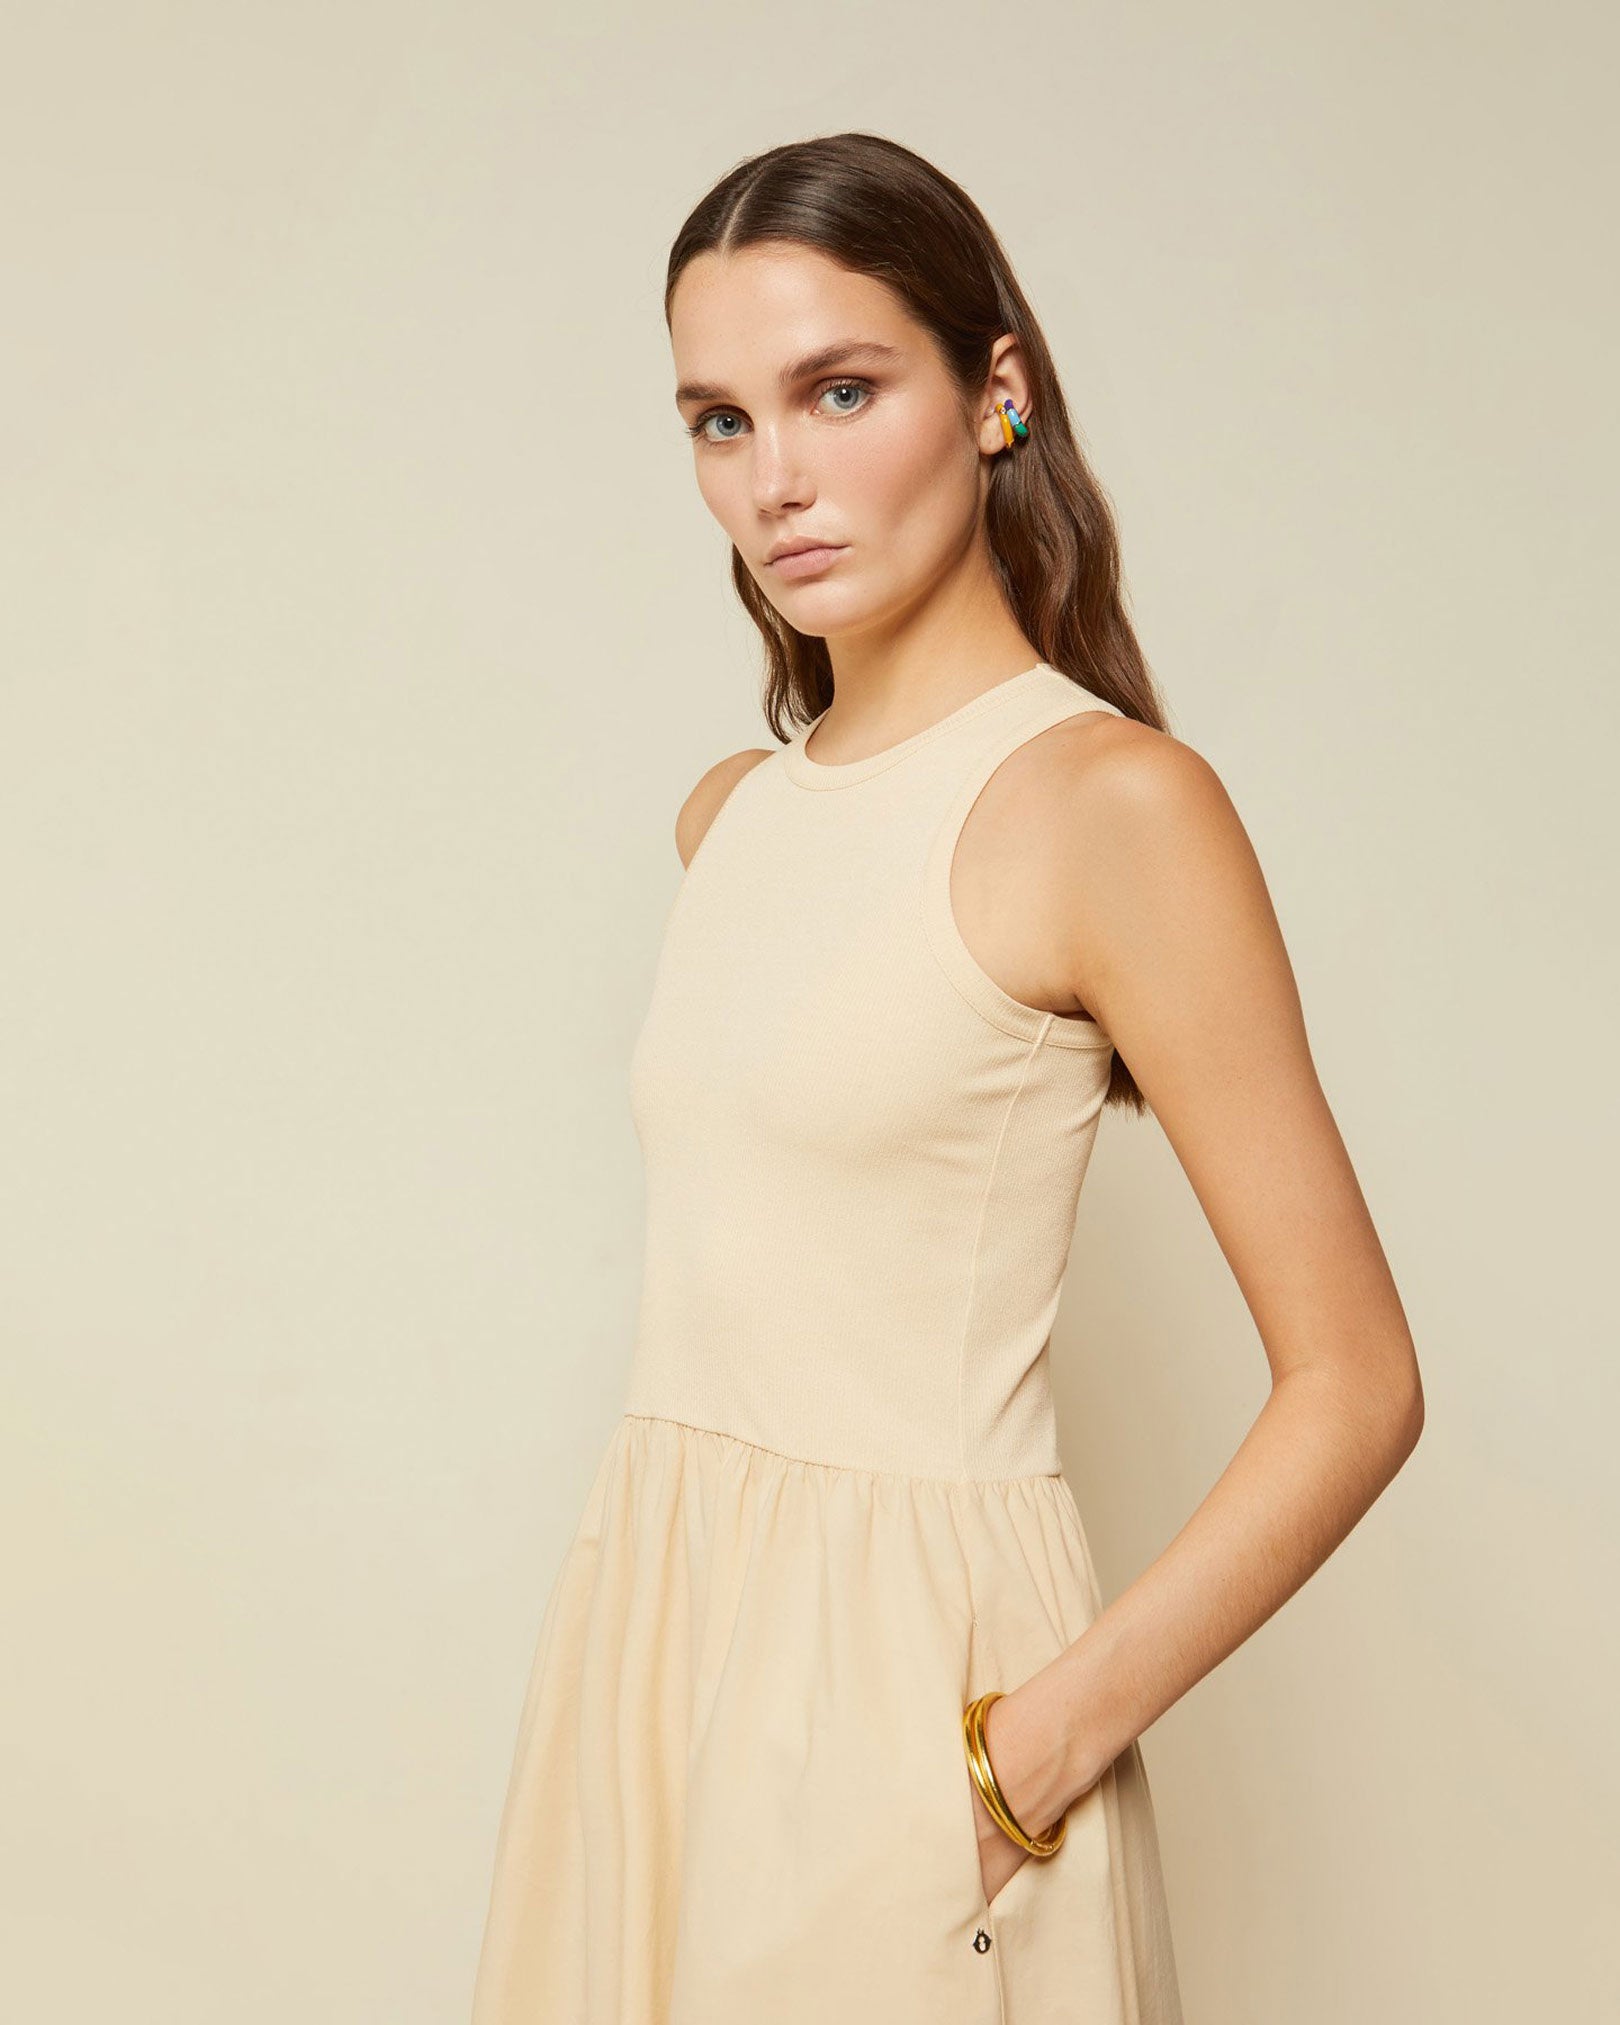 OTTOD'AME Tank Dress with Poplin Skirt in Cream available at Lahn.shop